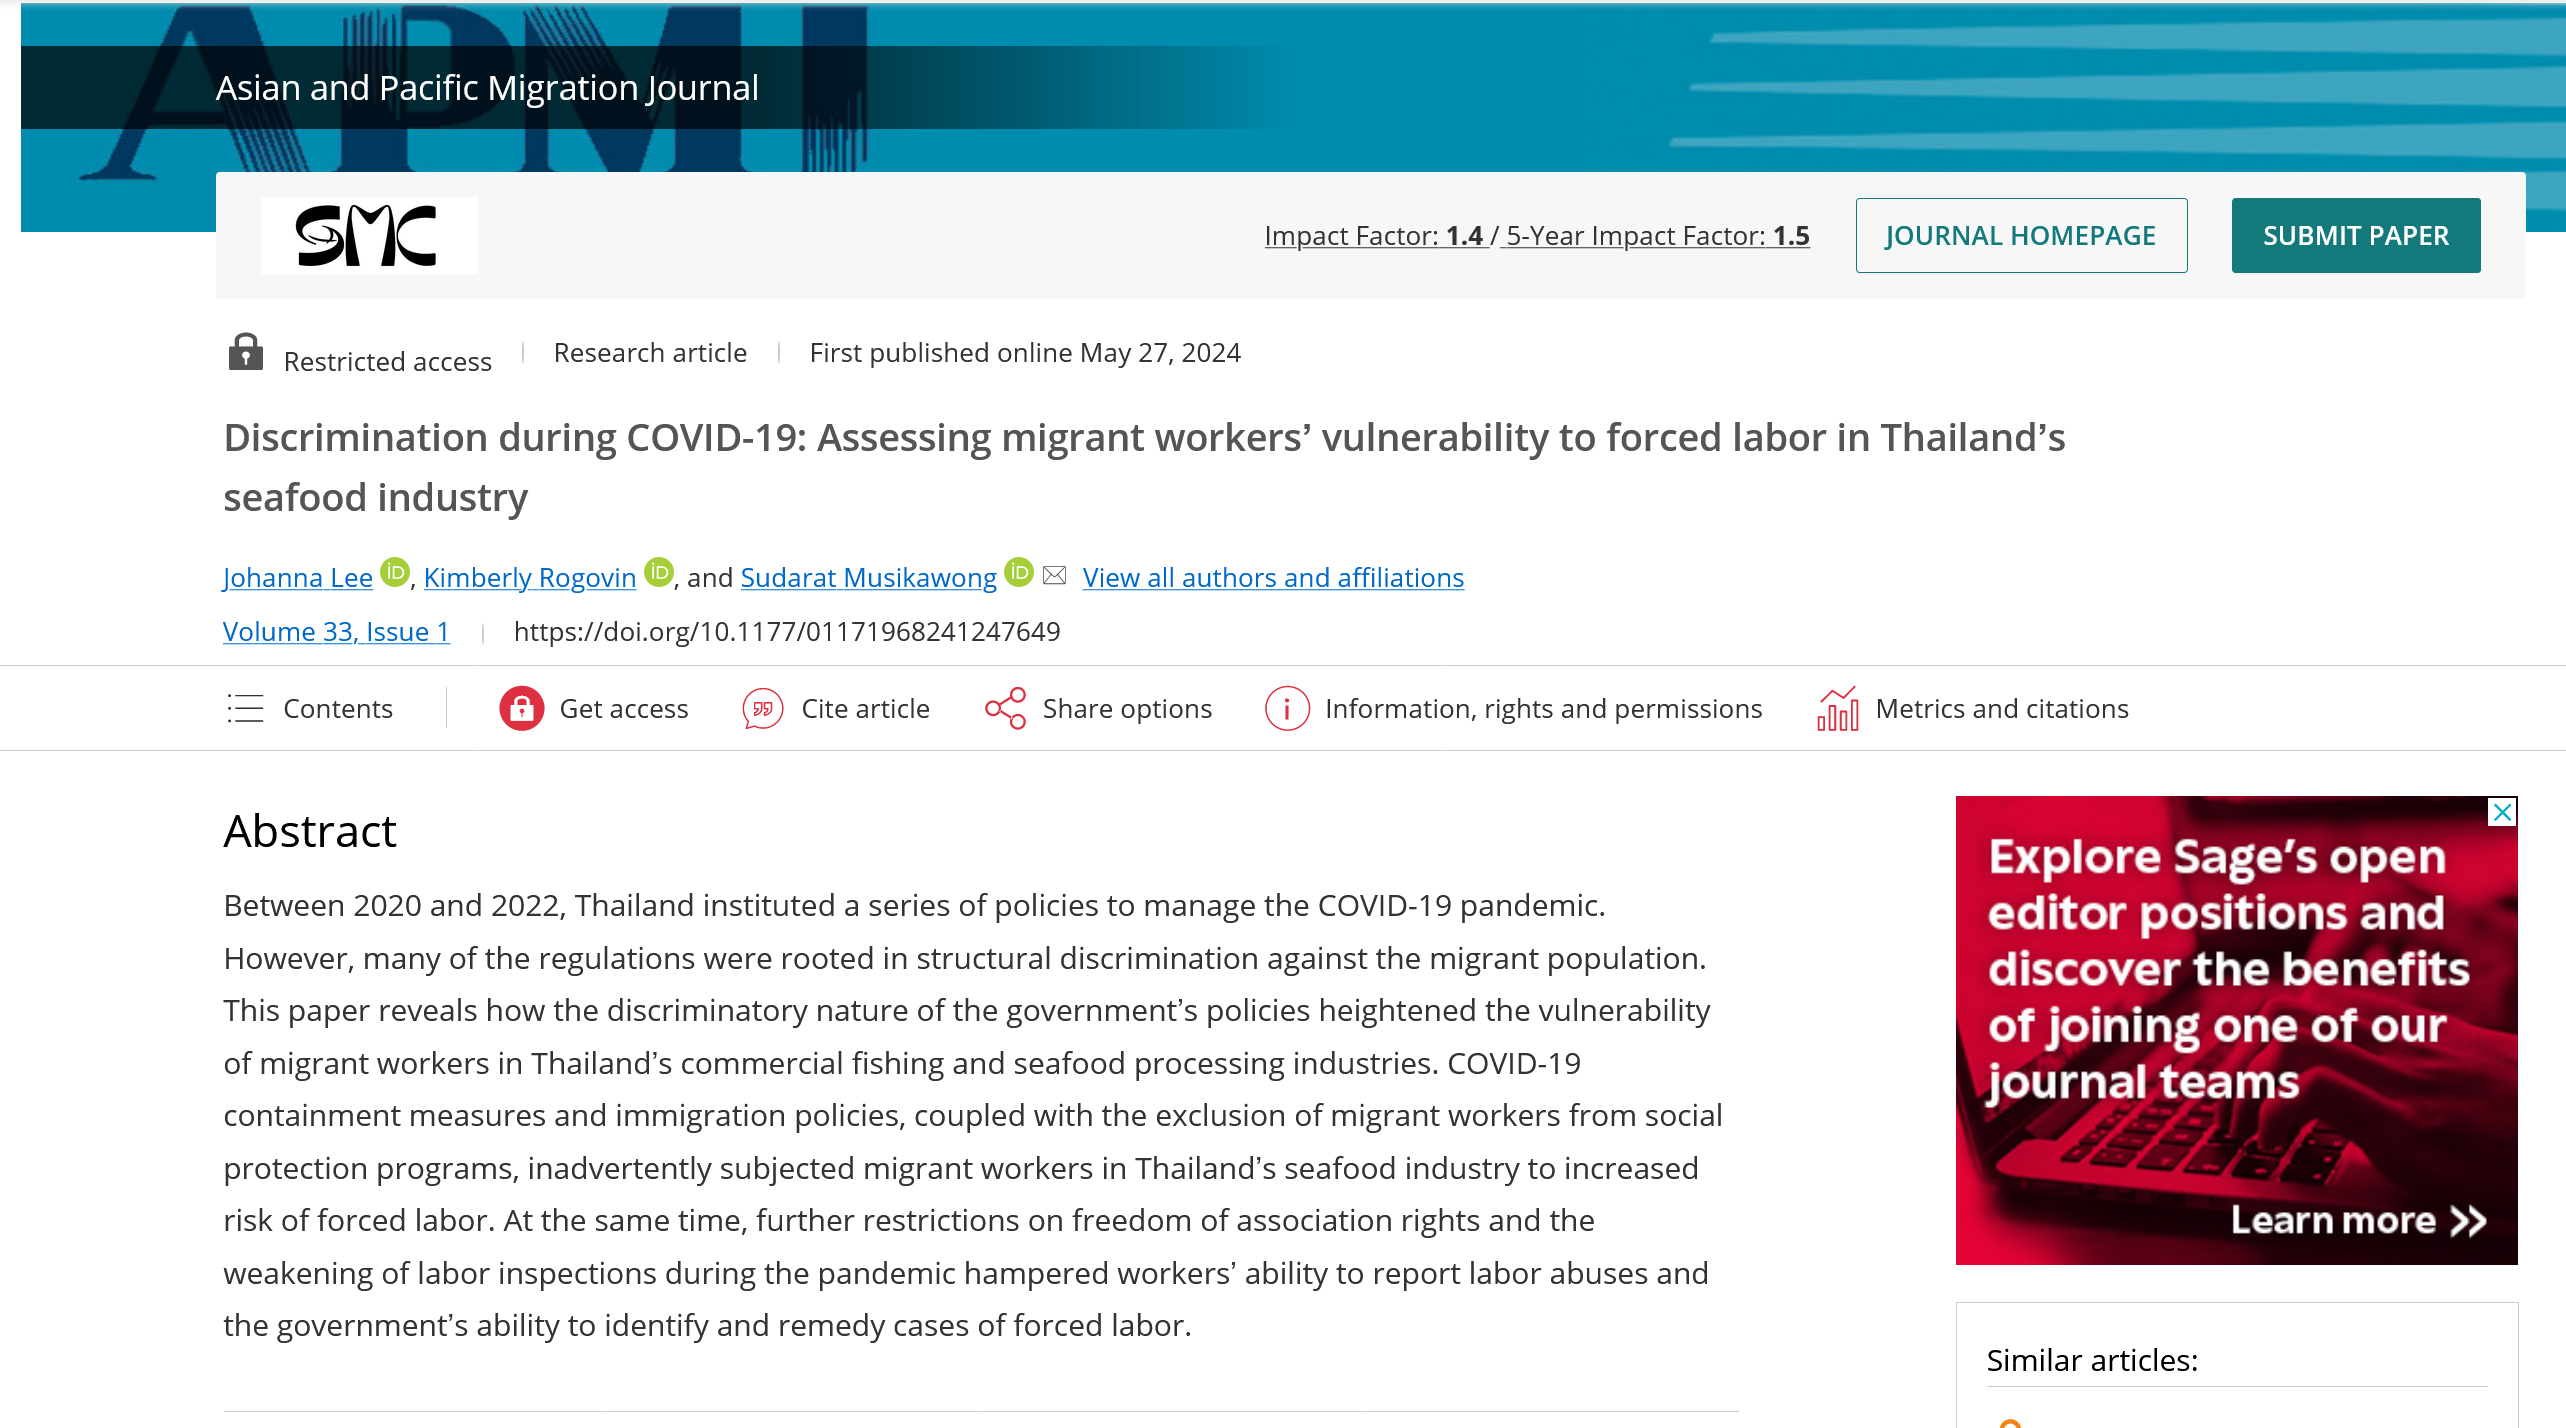 Discrimination during COVID-19: Assessing migrant workers’ vulnerability to forced labor in Thailand’s seafood industry